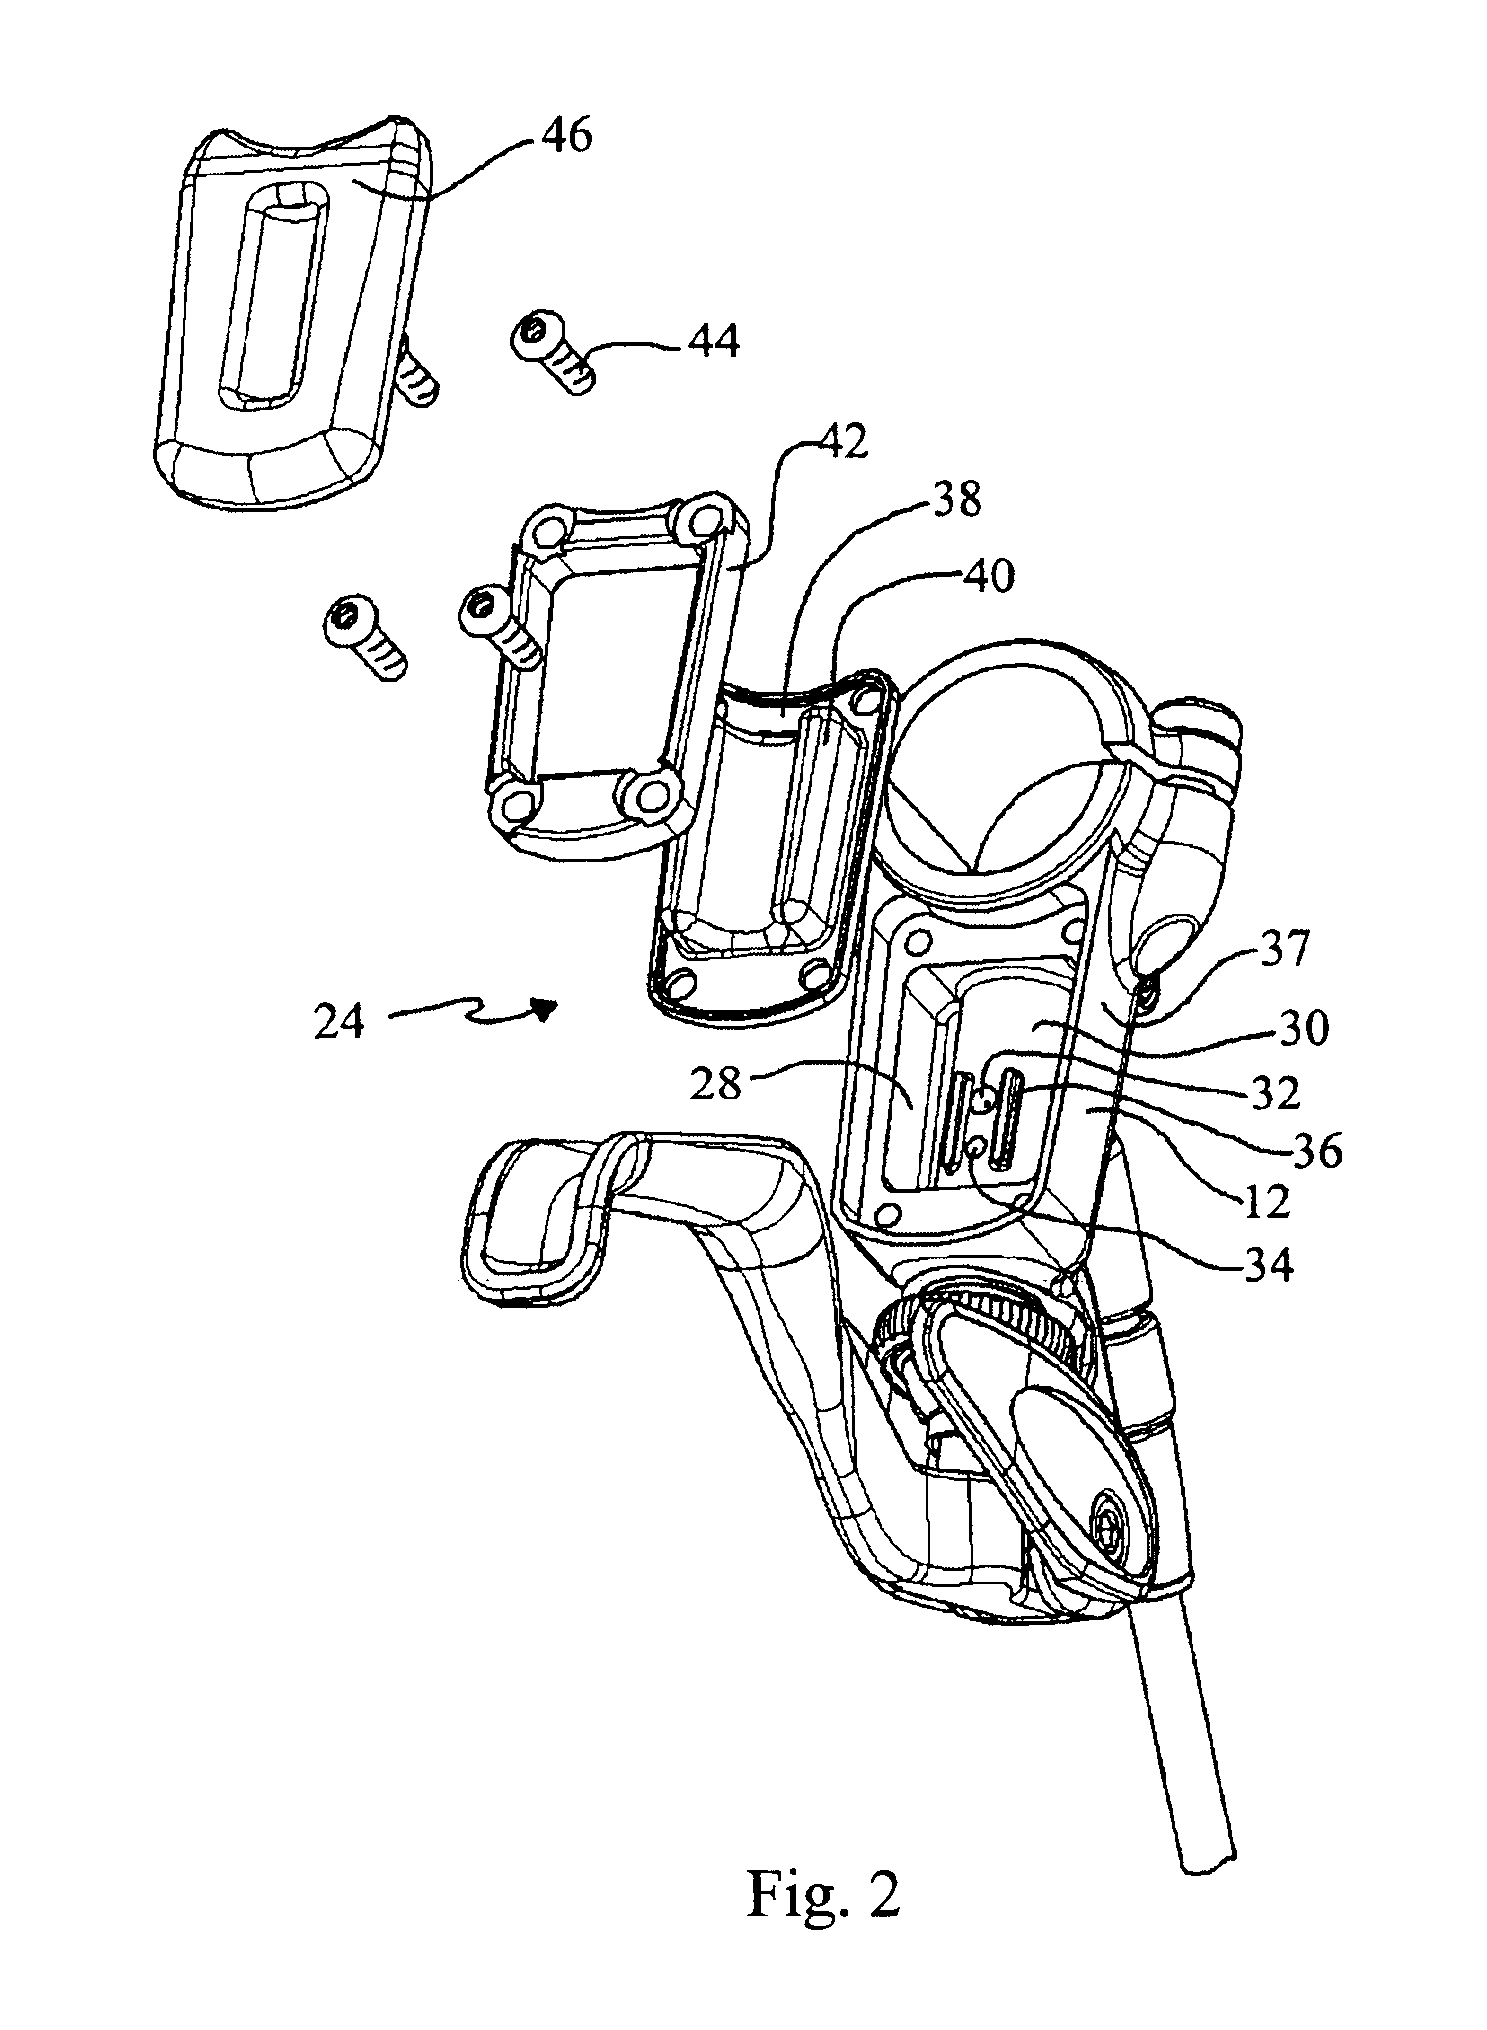 Reach adjustment mechanism for a master cylinder lever of a hydraulic disc brake